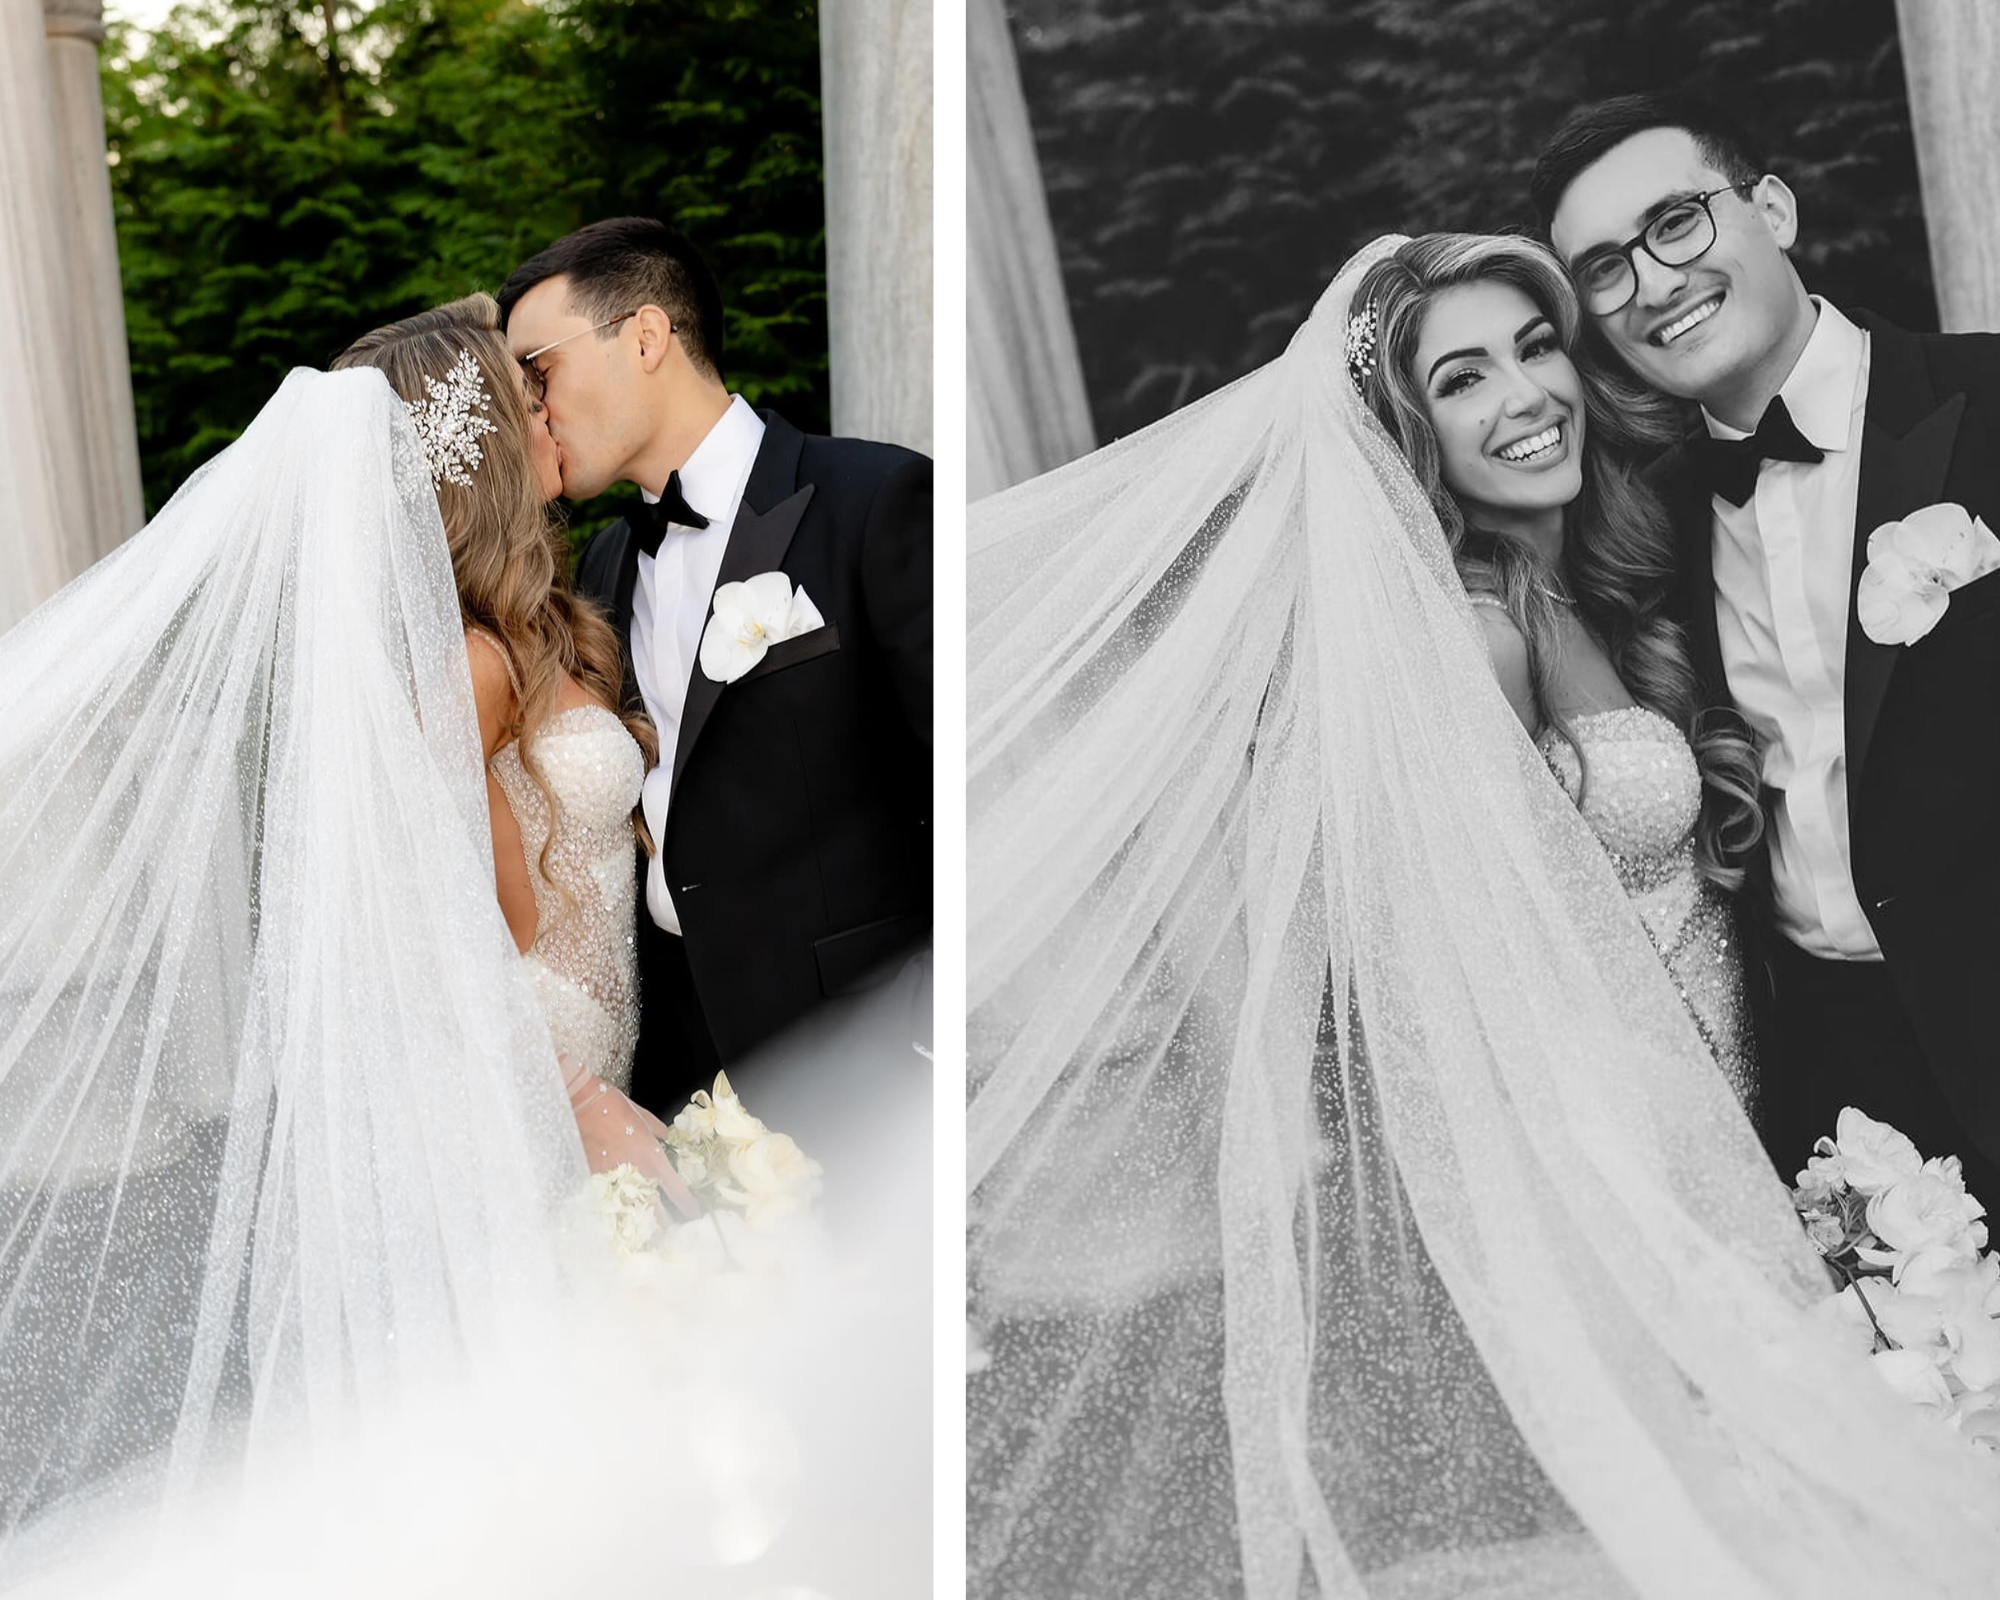 Our beautiful bride Ioanna with her handsome groom — her veil is wrapped around both of them and she is wearing her gown and Swarovski crystal bridal headpiece.